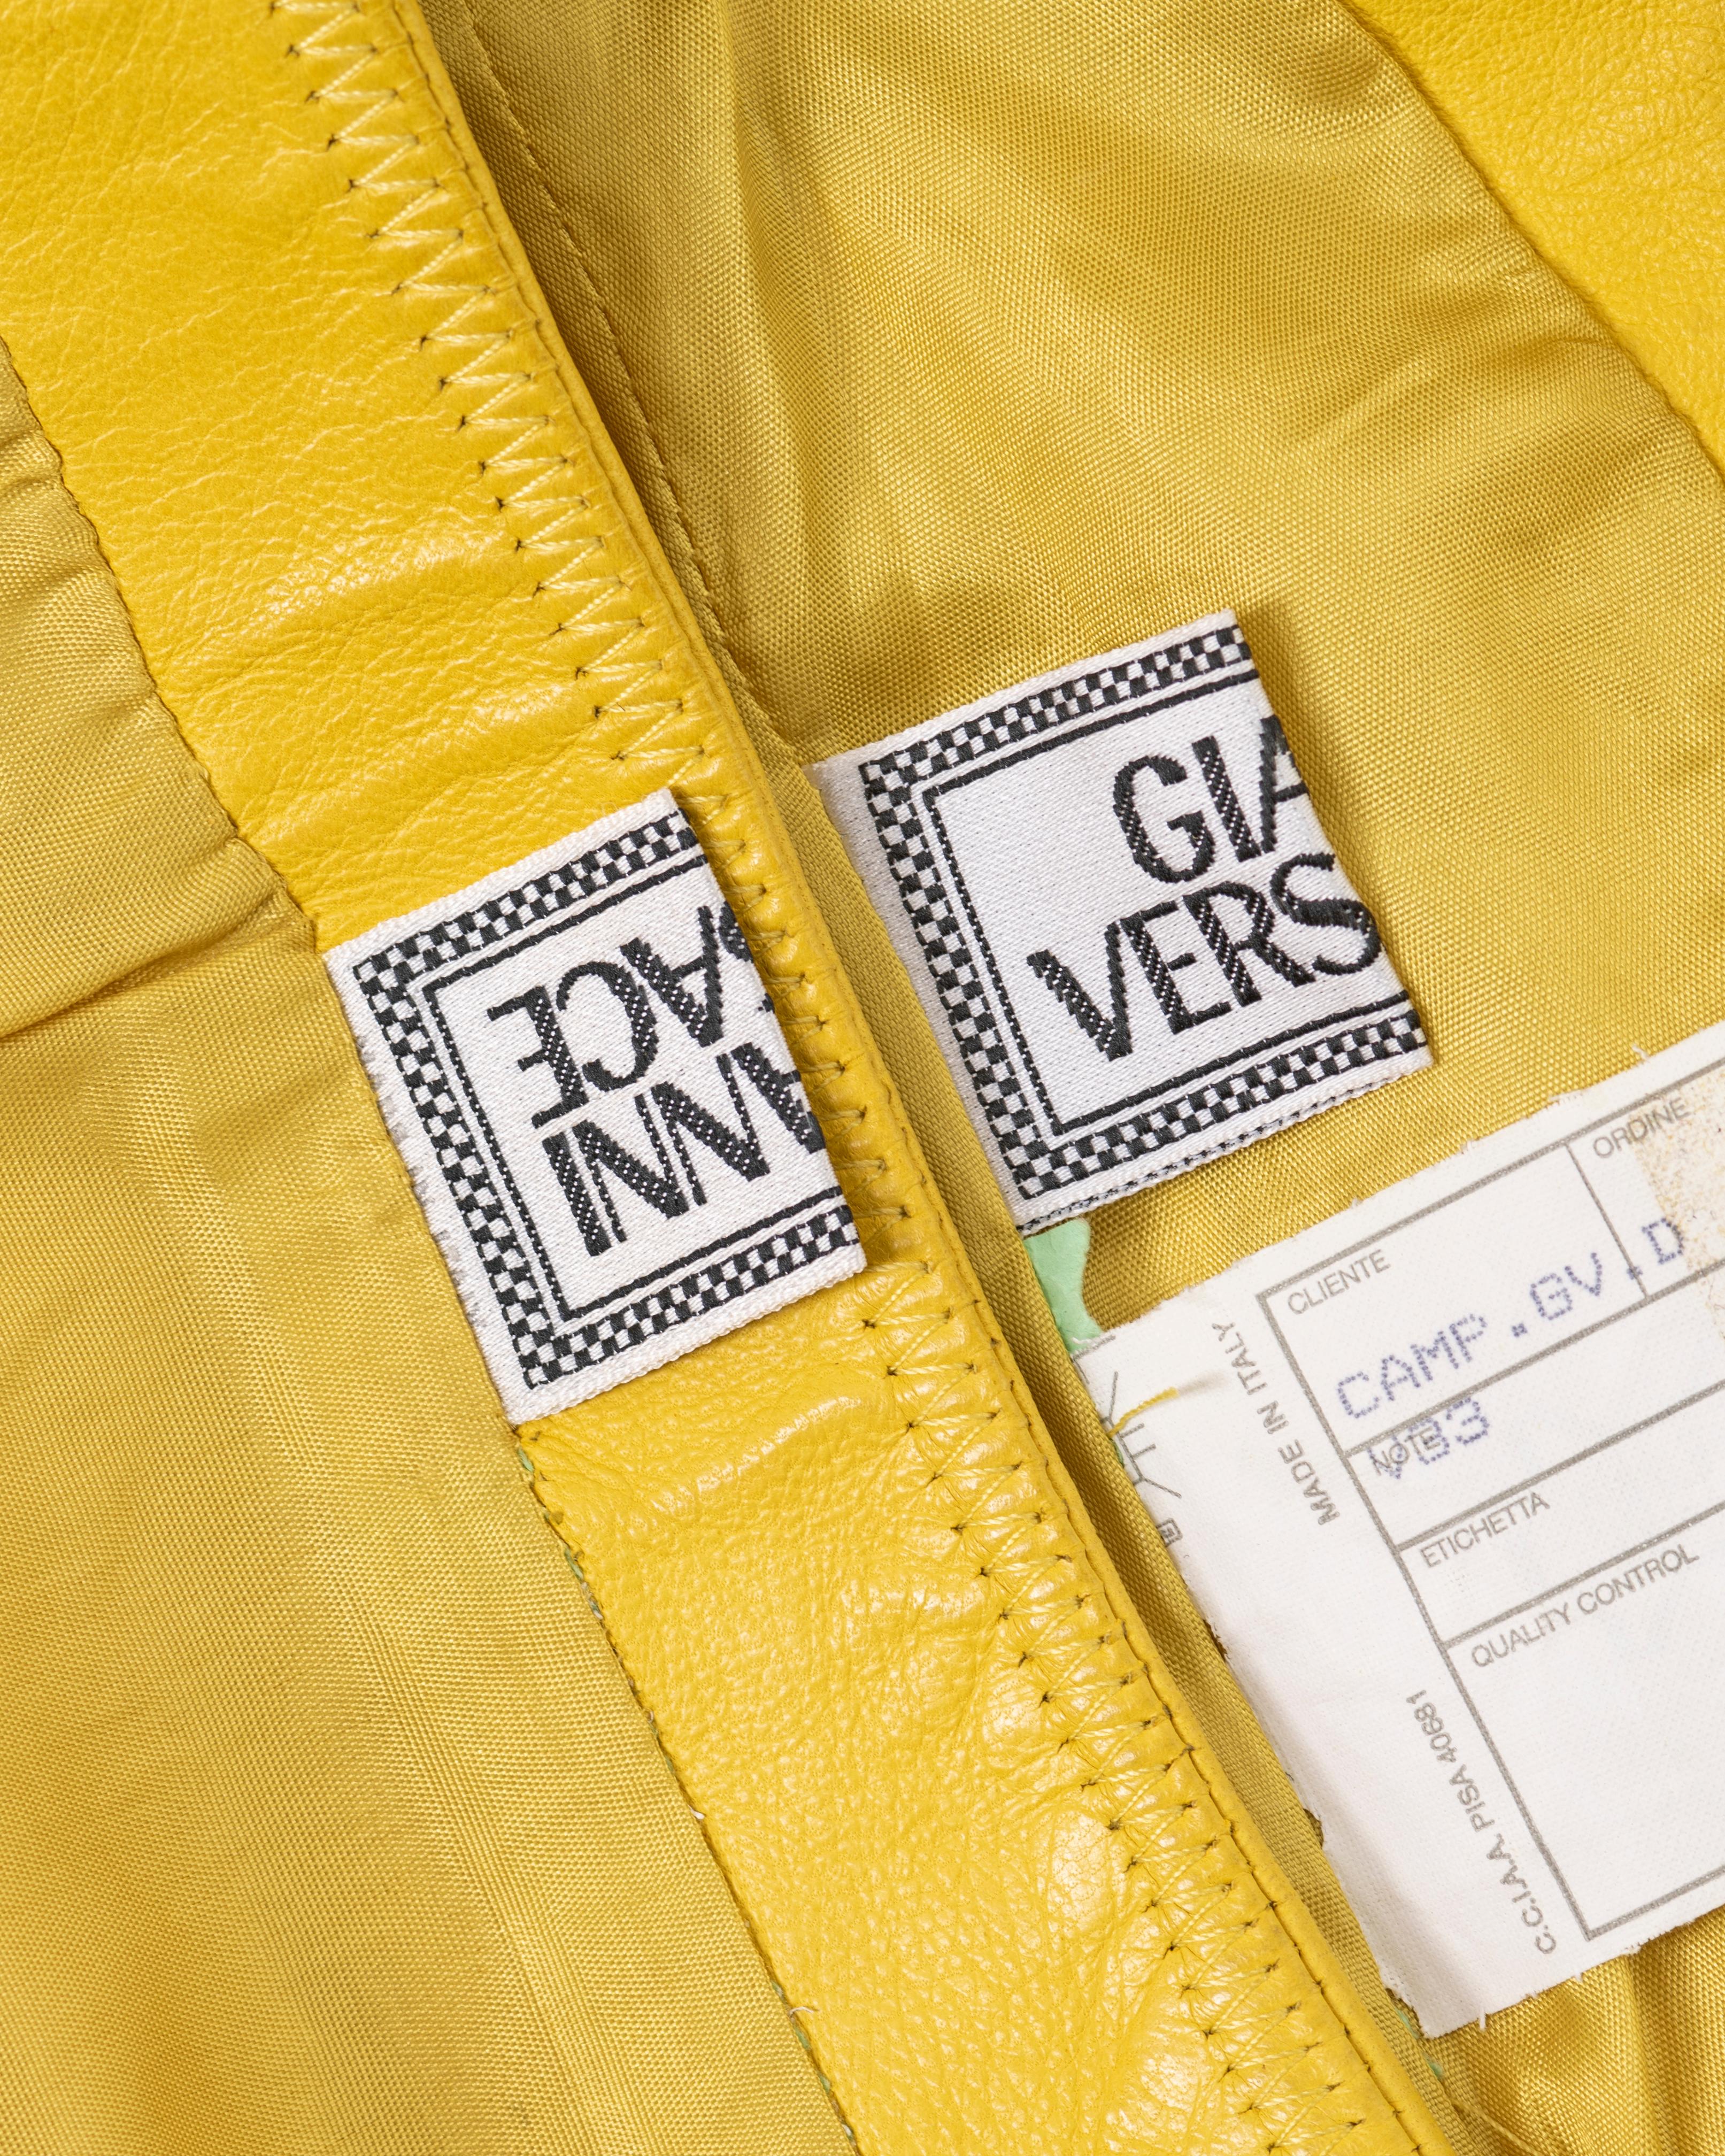 Gianni Versace yellow lambskin leather top and skirt, ss 2003 For Sale 8